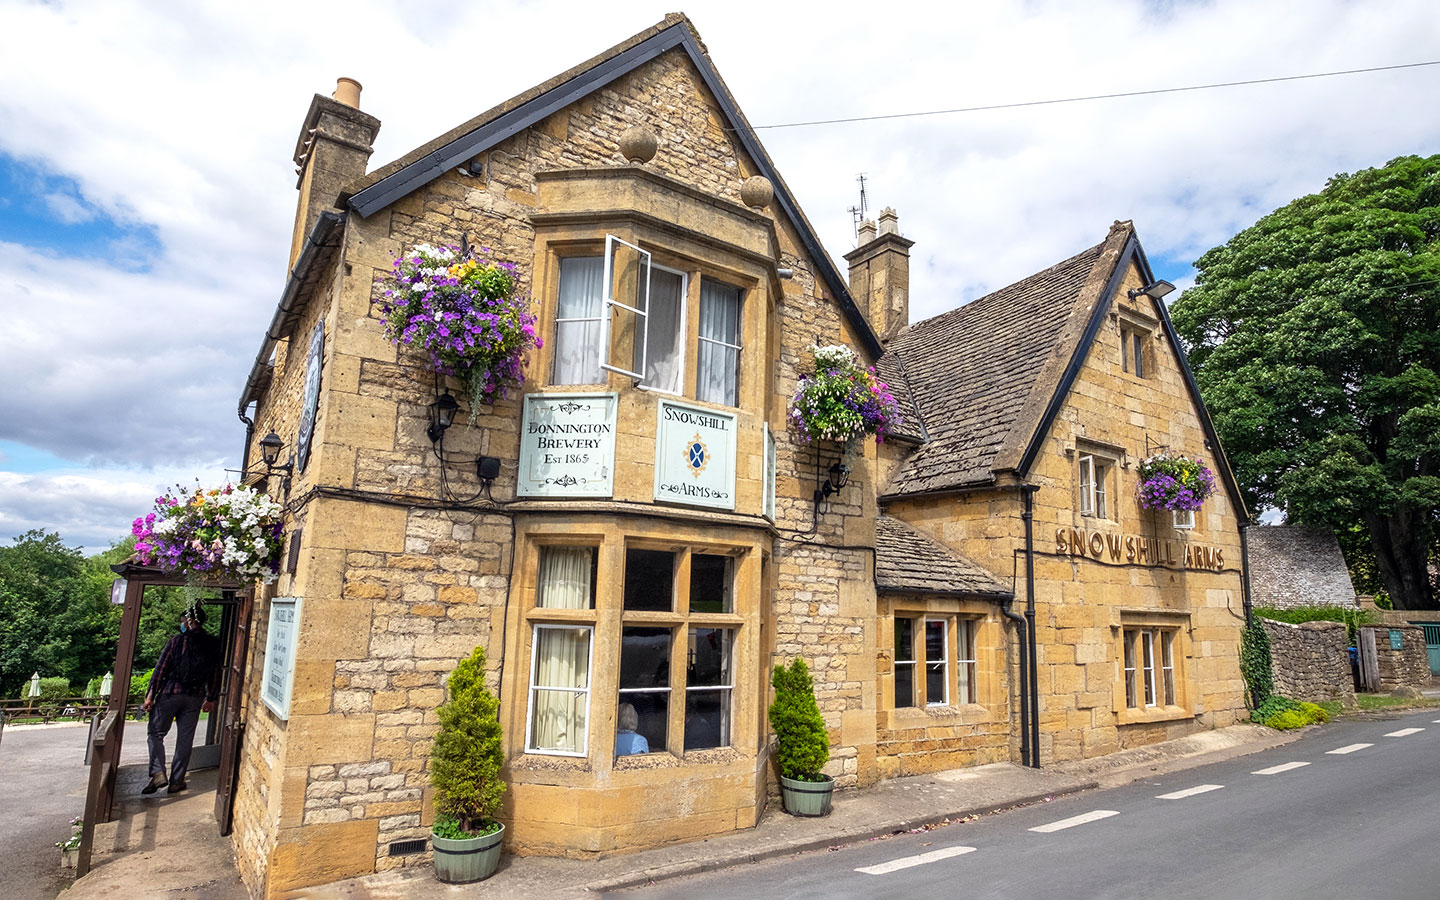 The Snowshill Arms pub in Snowshill Cotswolds